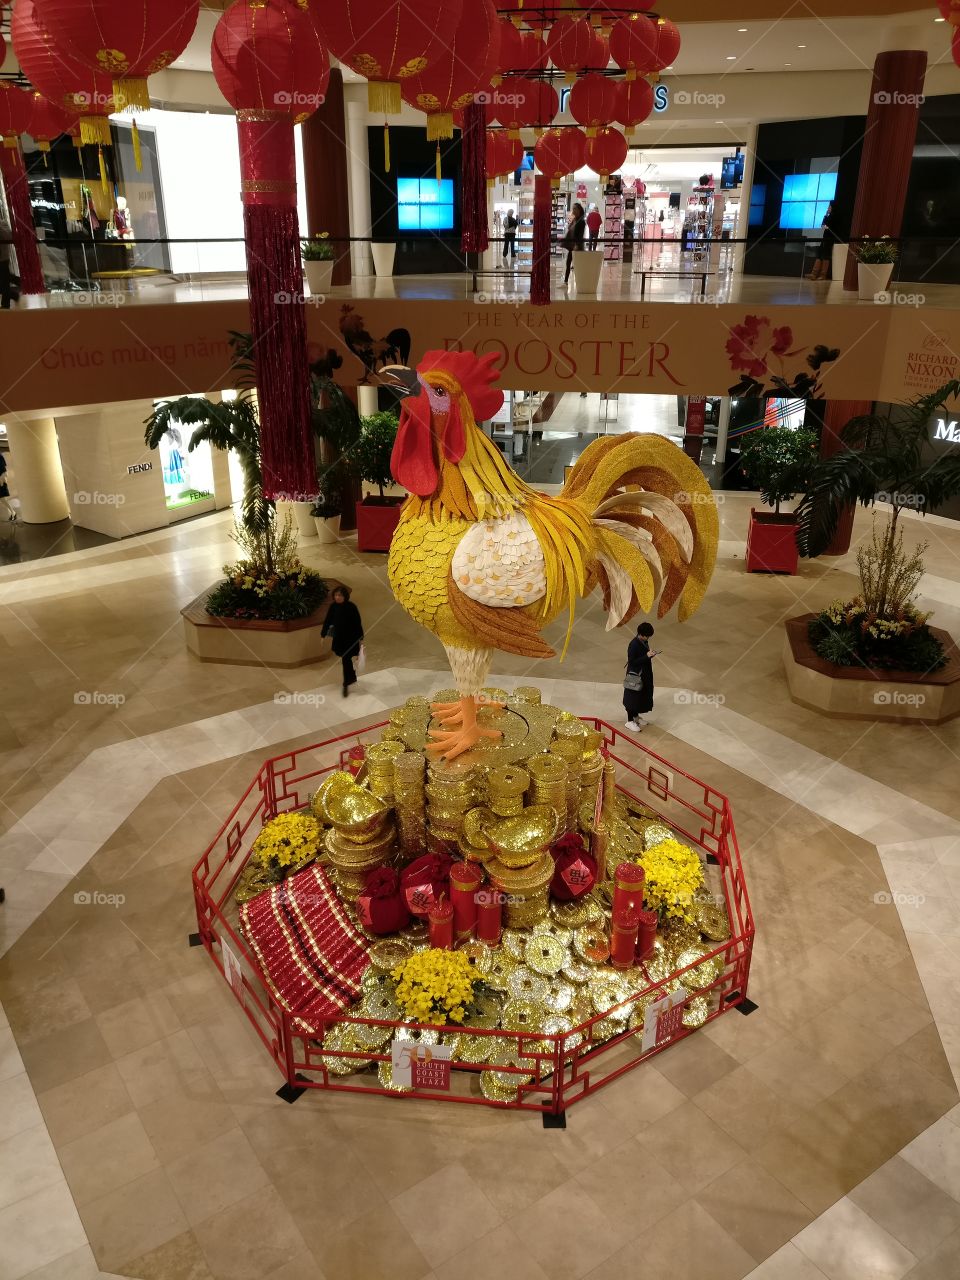 South coast plaza rooster